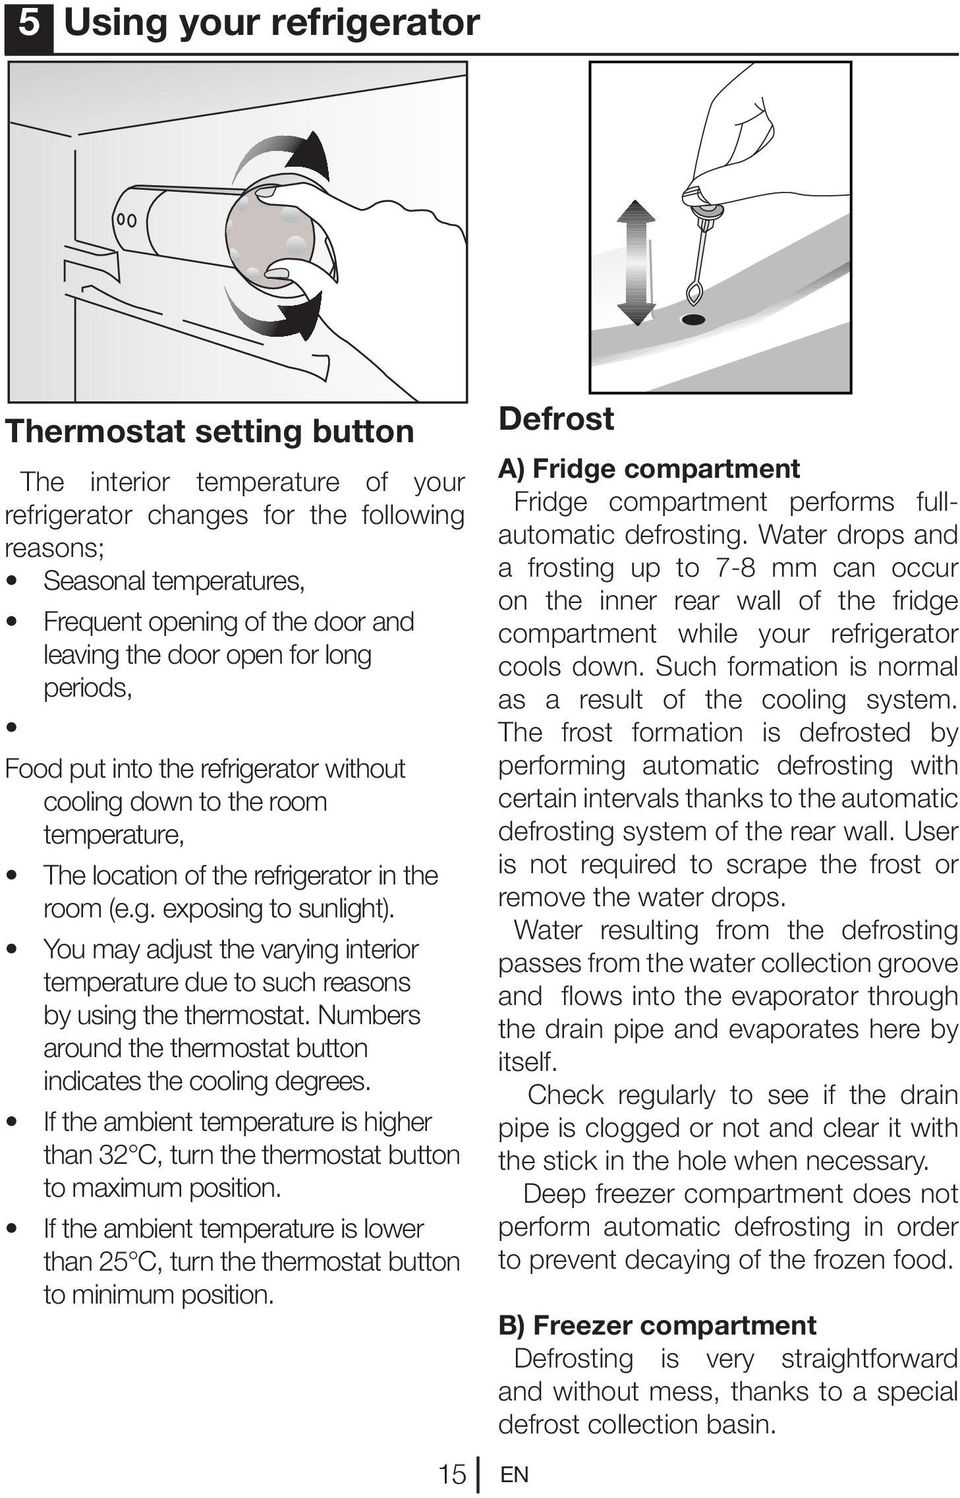 You may adjust the varying interior temperature due to such reasons by using the thermostat. Numbers around the thermostat button indicates the cooling degrees.